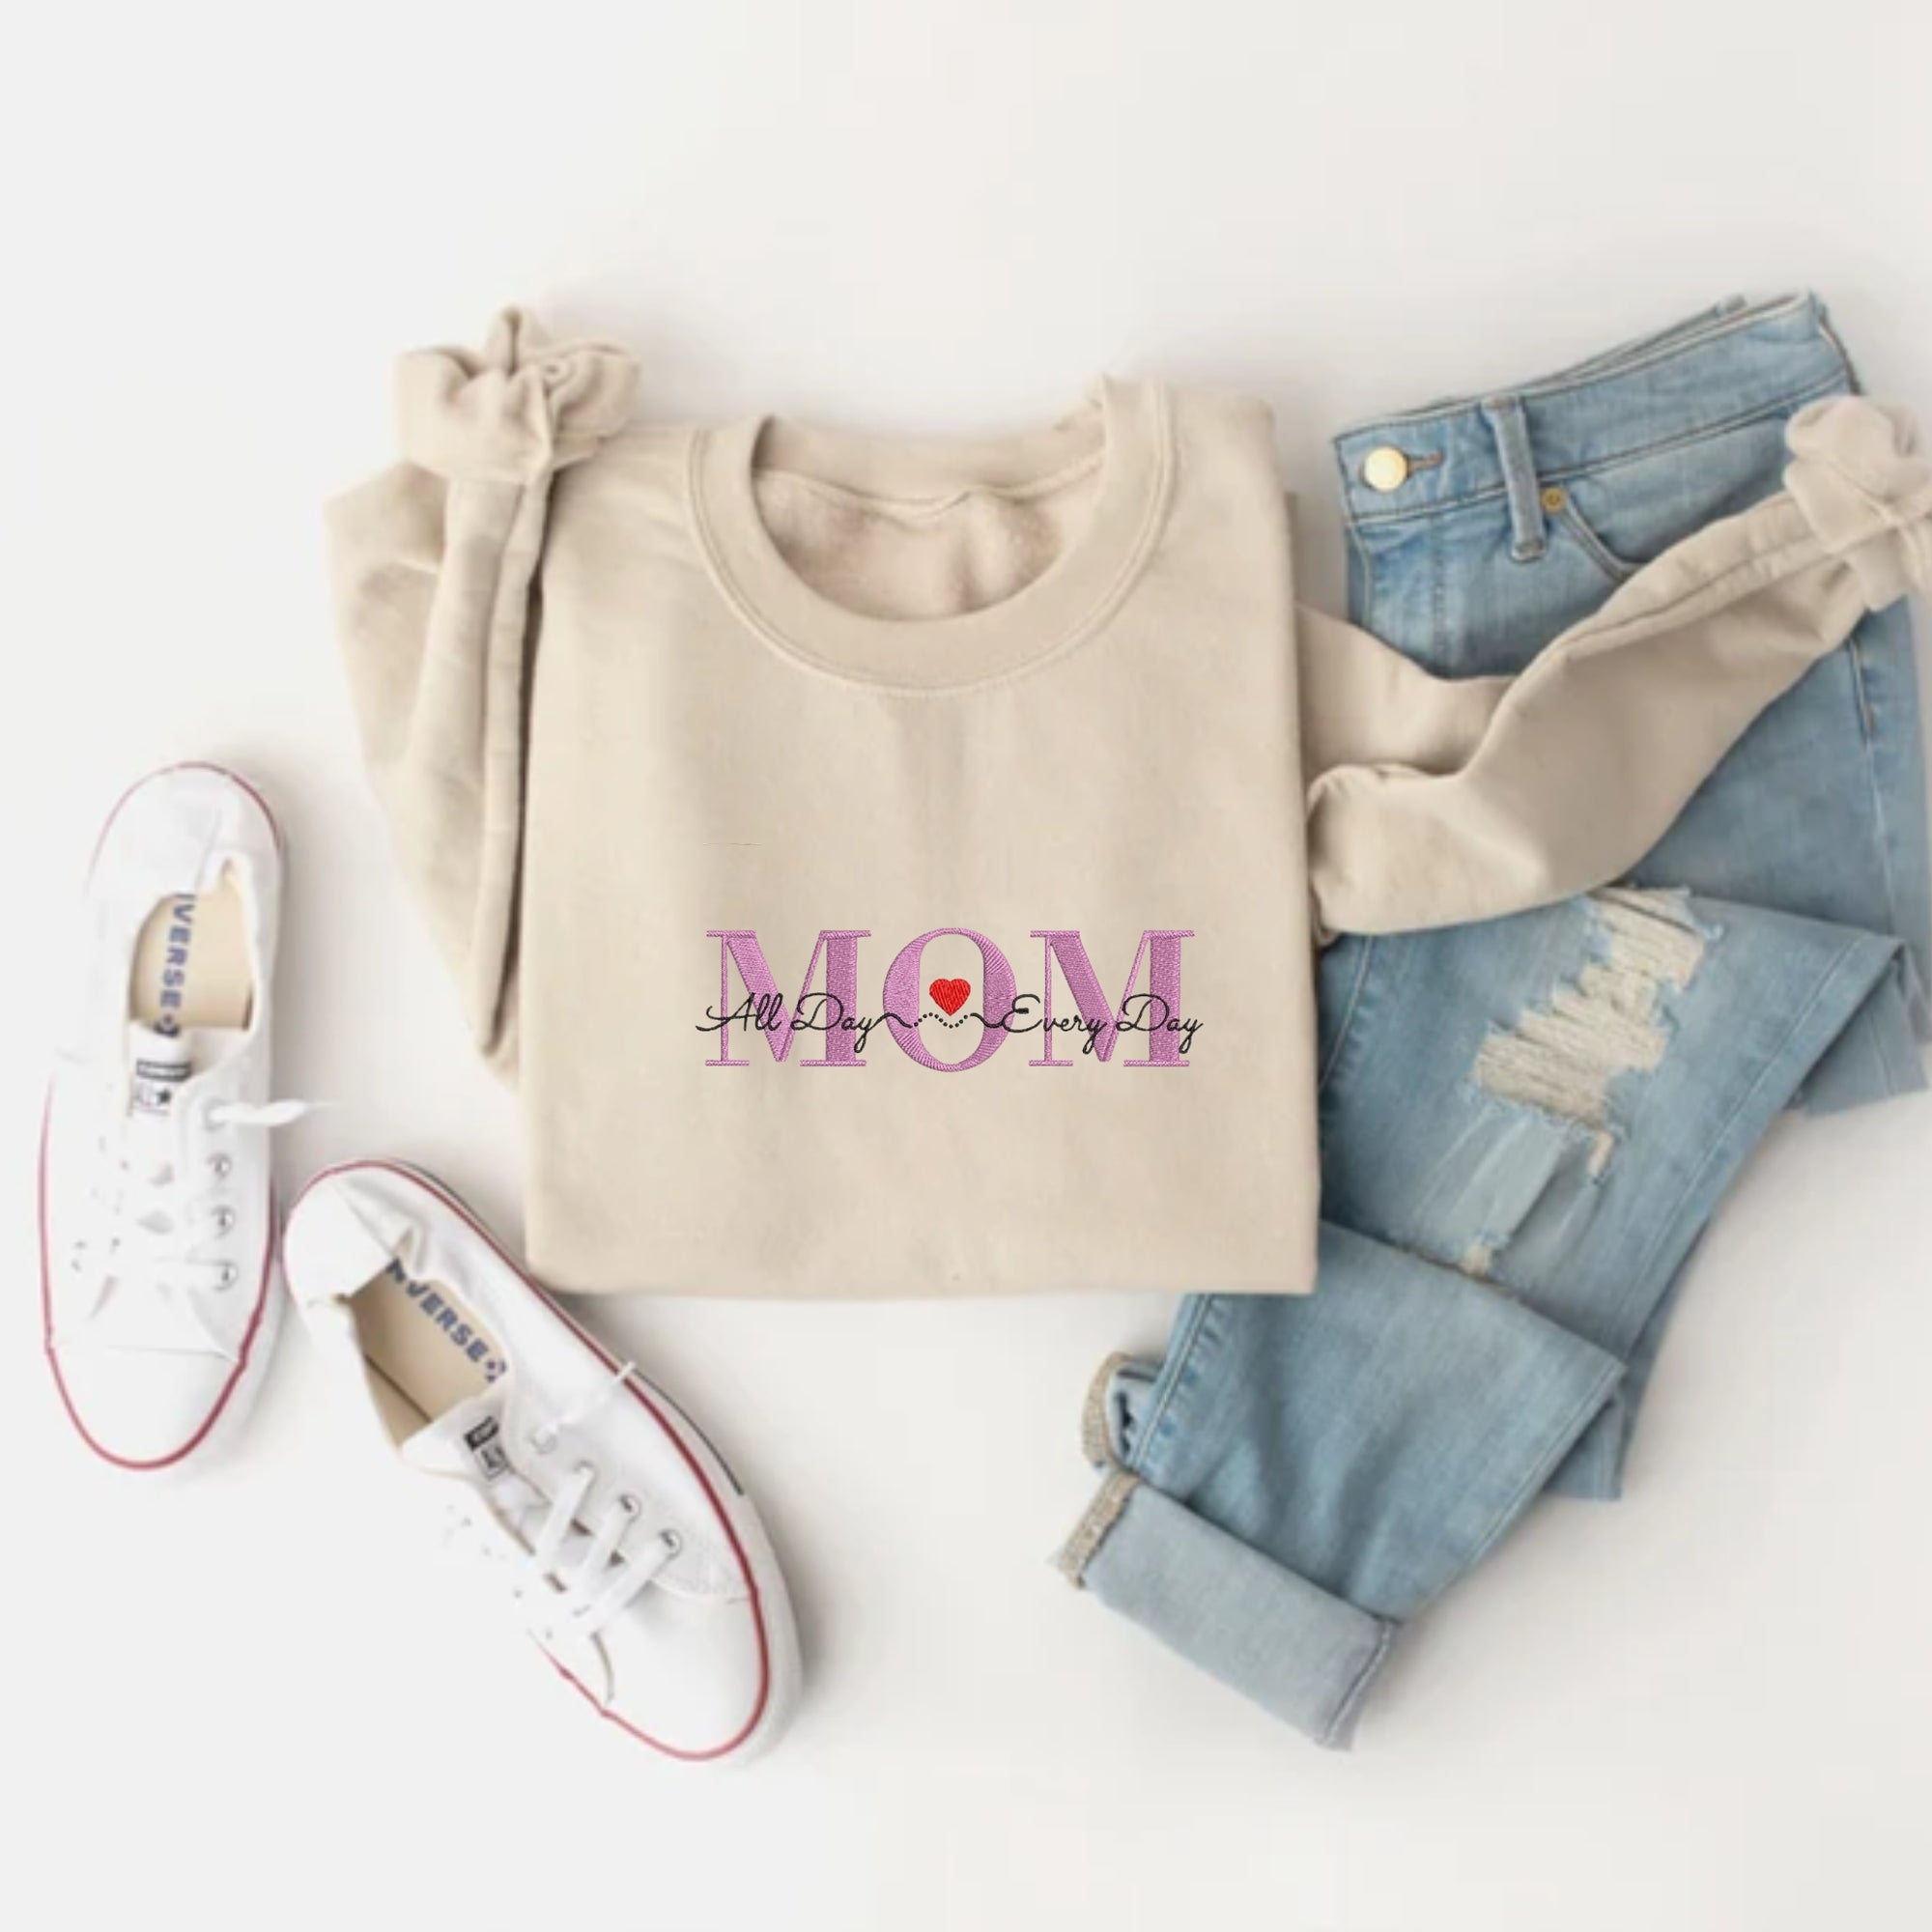 Baby/Toddler Girl Personalized Embroidered Sweatshirt